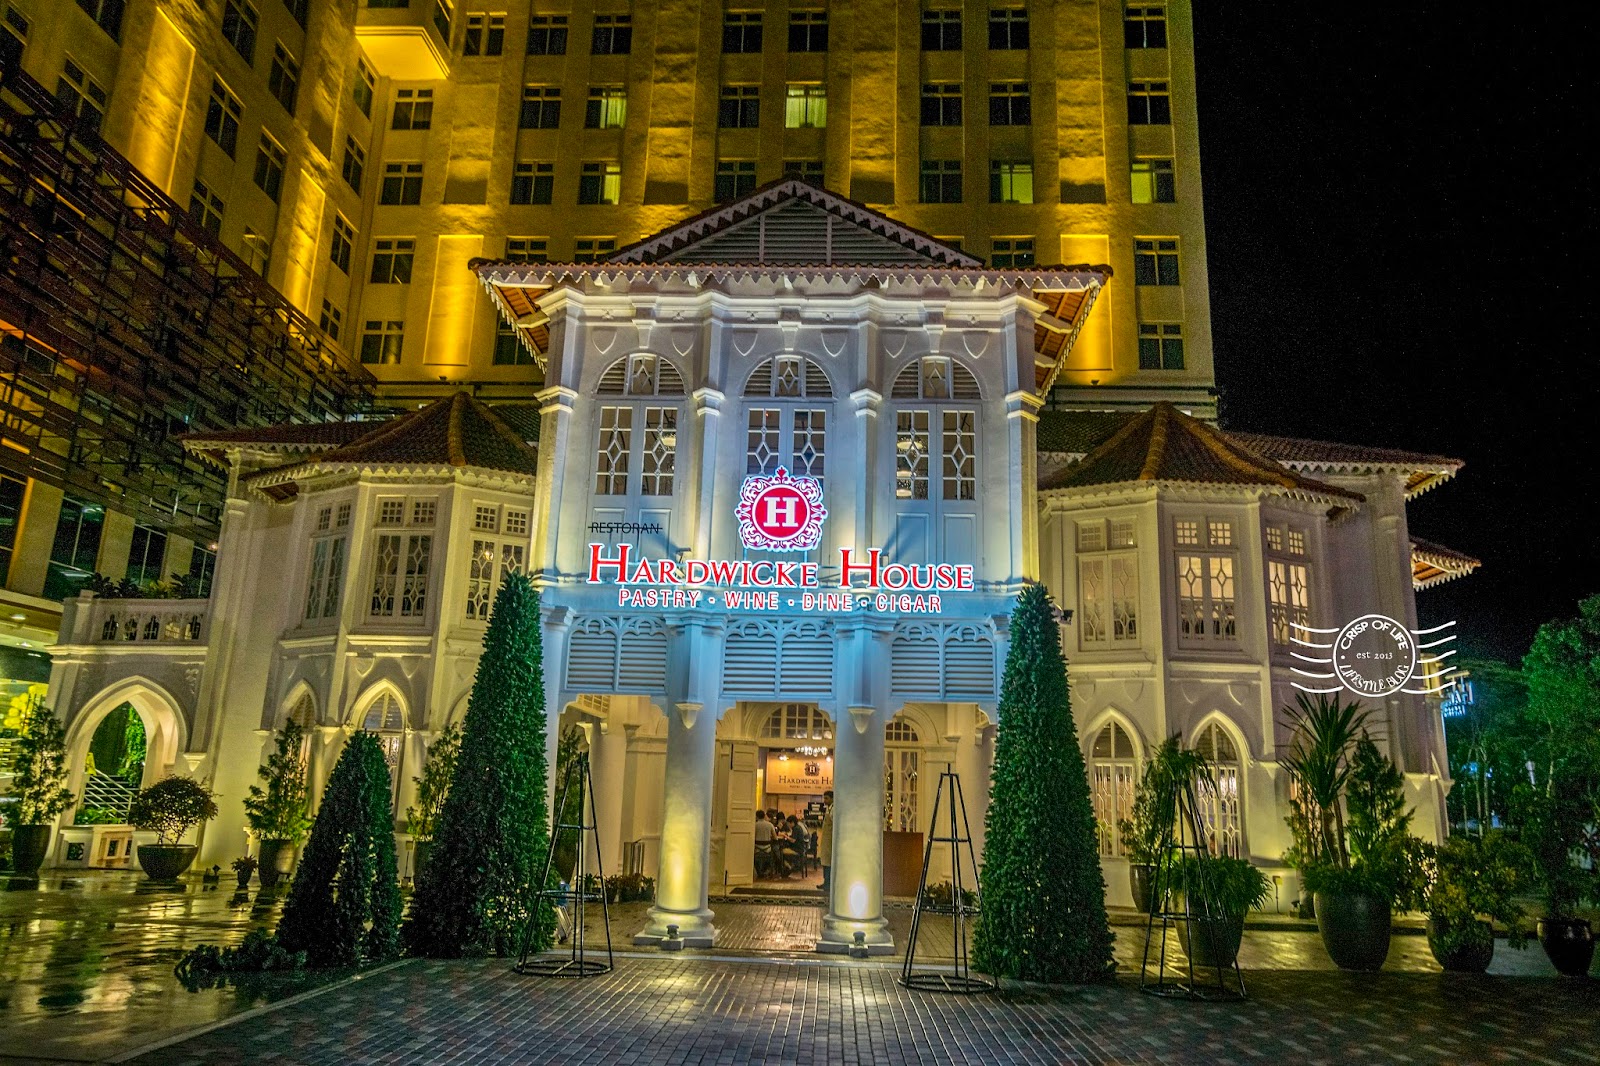 Christmas Buffet Dinner Under The Stars at Hardwicke House(Pastry, Wine, Dine, Cigar) @ Vouk Hotel, Penang